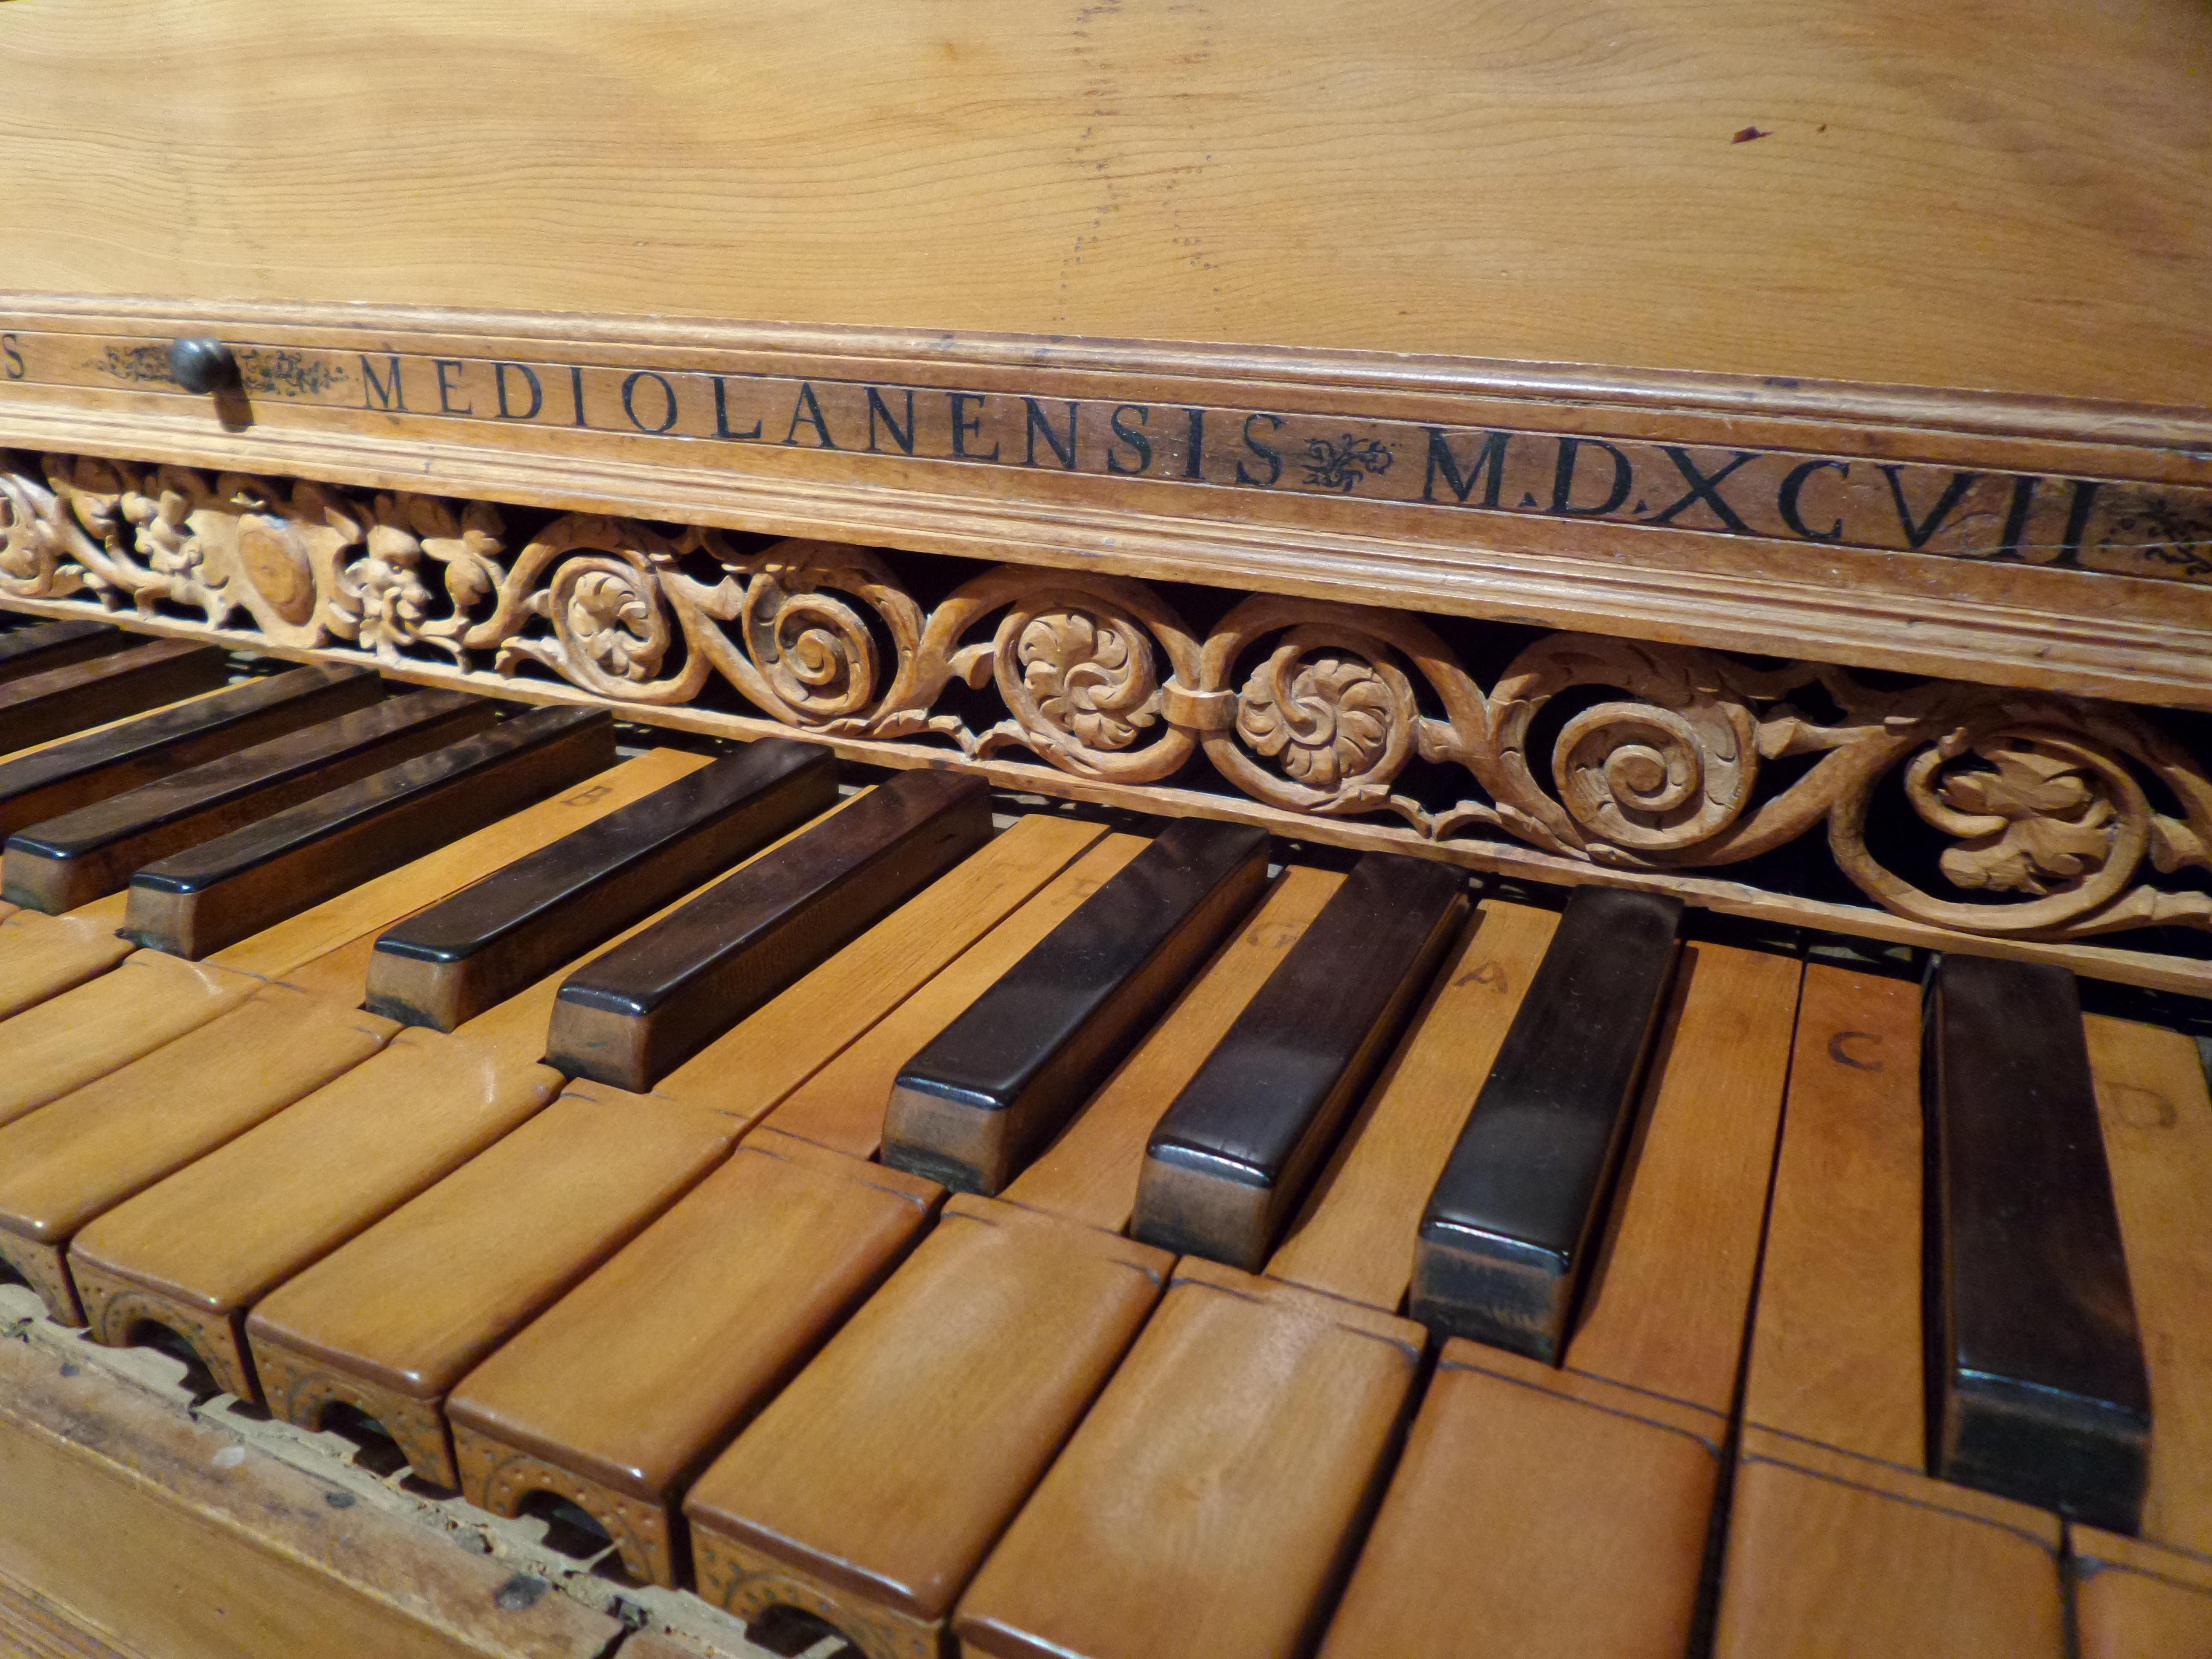 Keyboard, Piano, Museum, Old, Close Up, No People Free Image